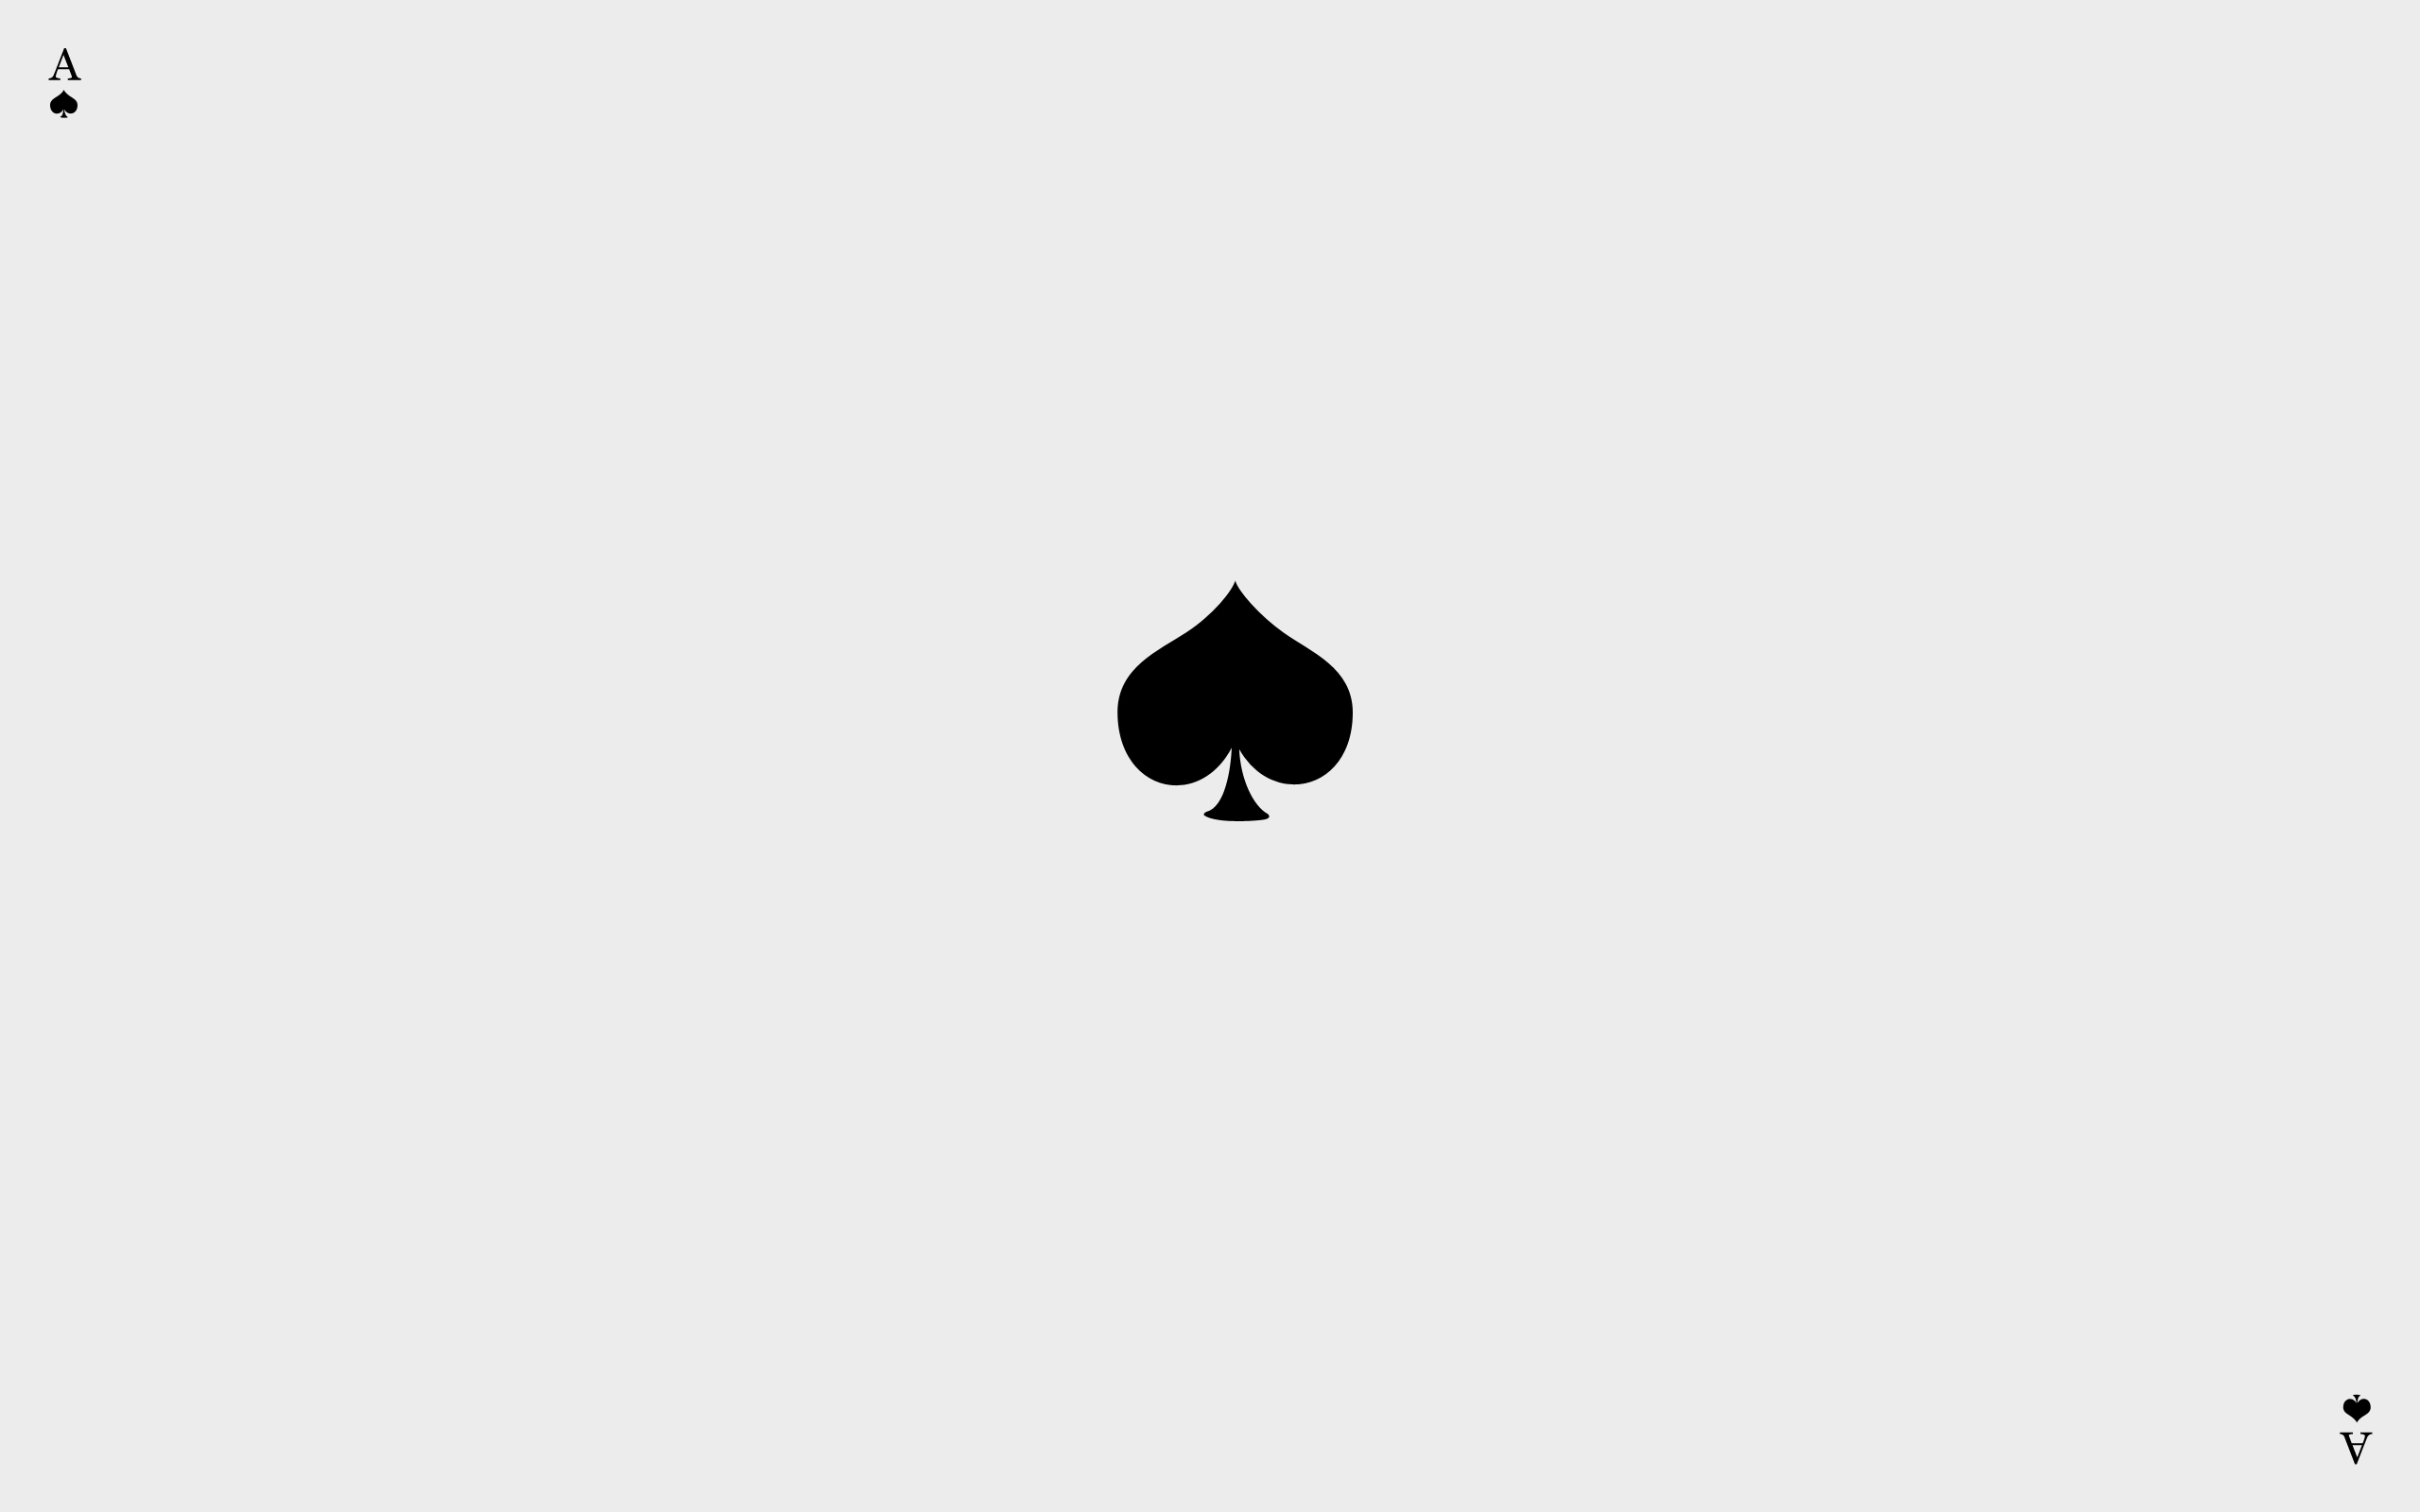 General 2560x1600 minimalism Ace of Spades playing cards simple background white background